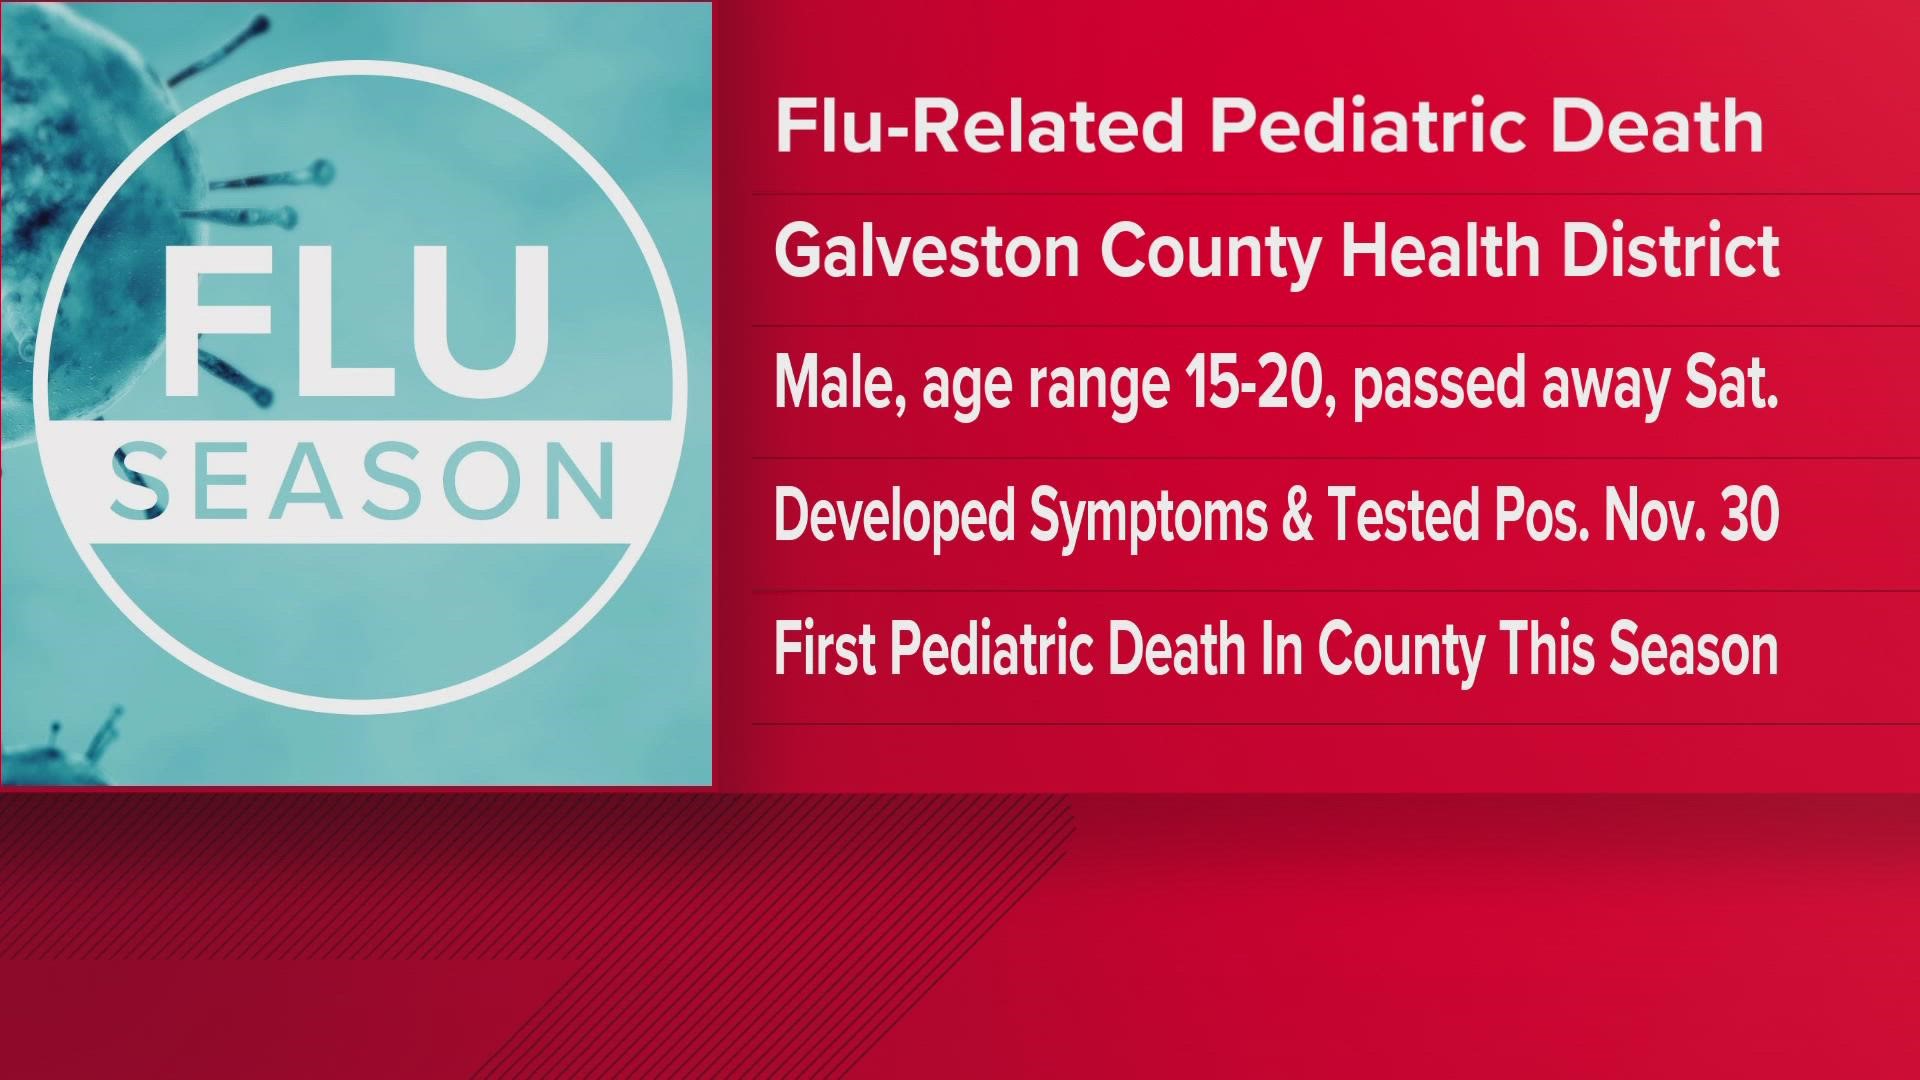 Health officials said the victim developed symptoms and tested positive for Influenza A on Nov. 30 and died on Dec. 3.